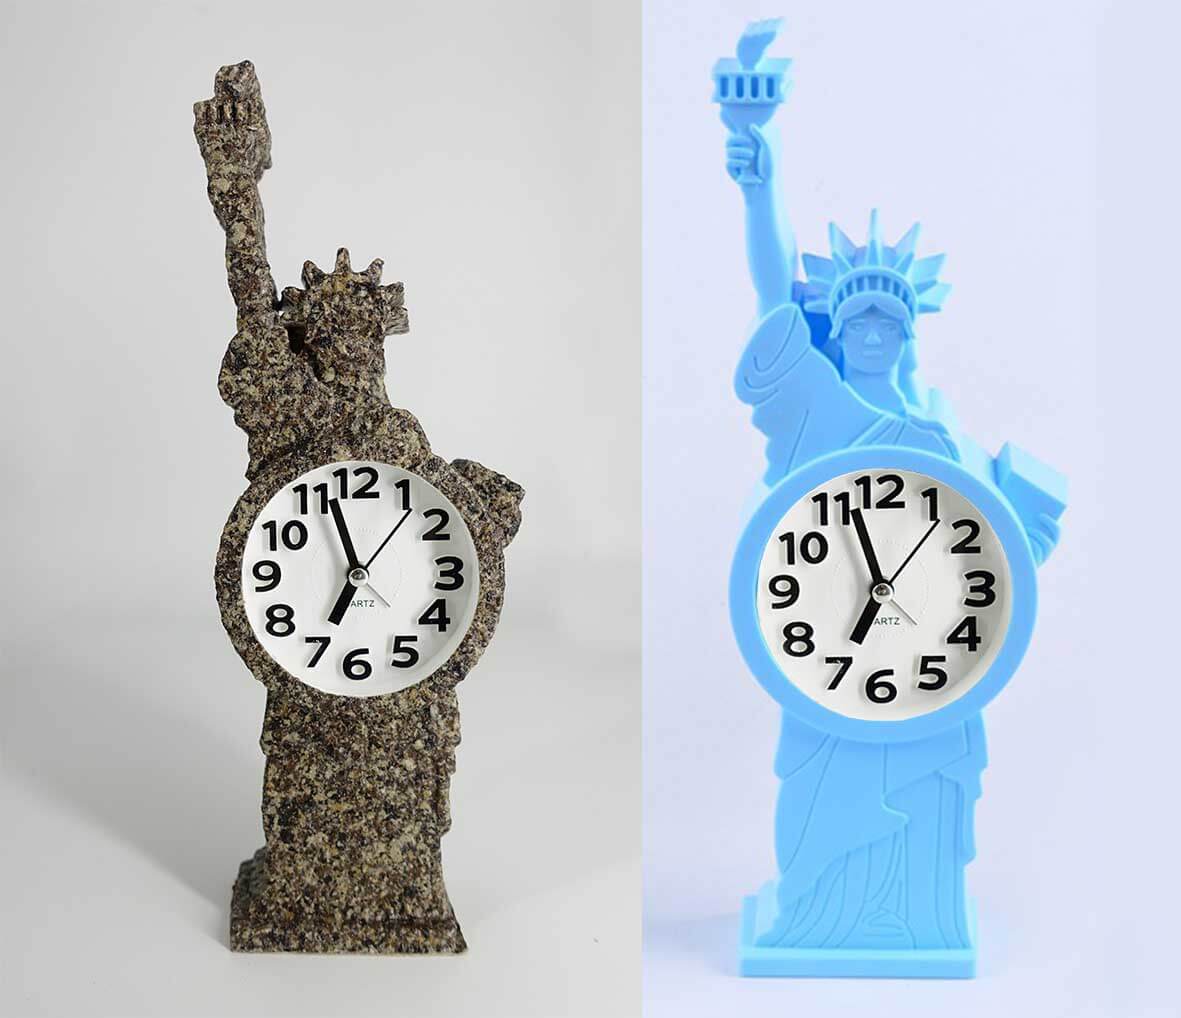 Normal style plastic clock become like stone carving by covered style plastic clock